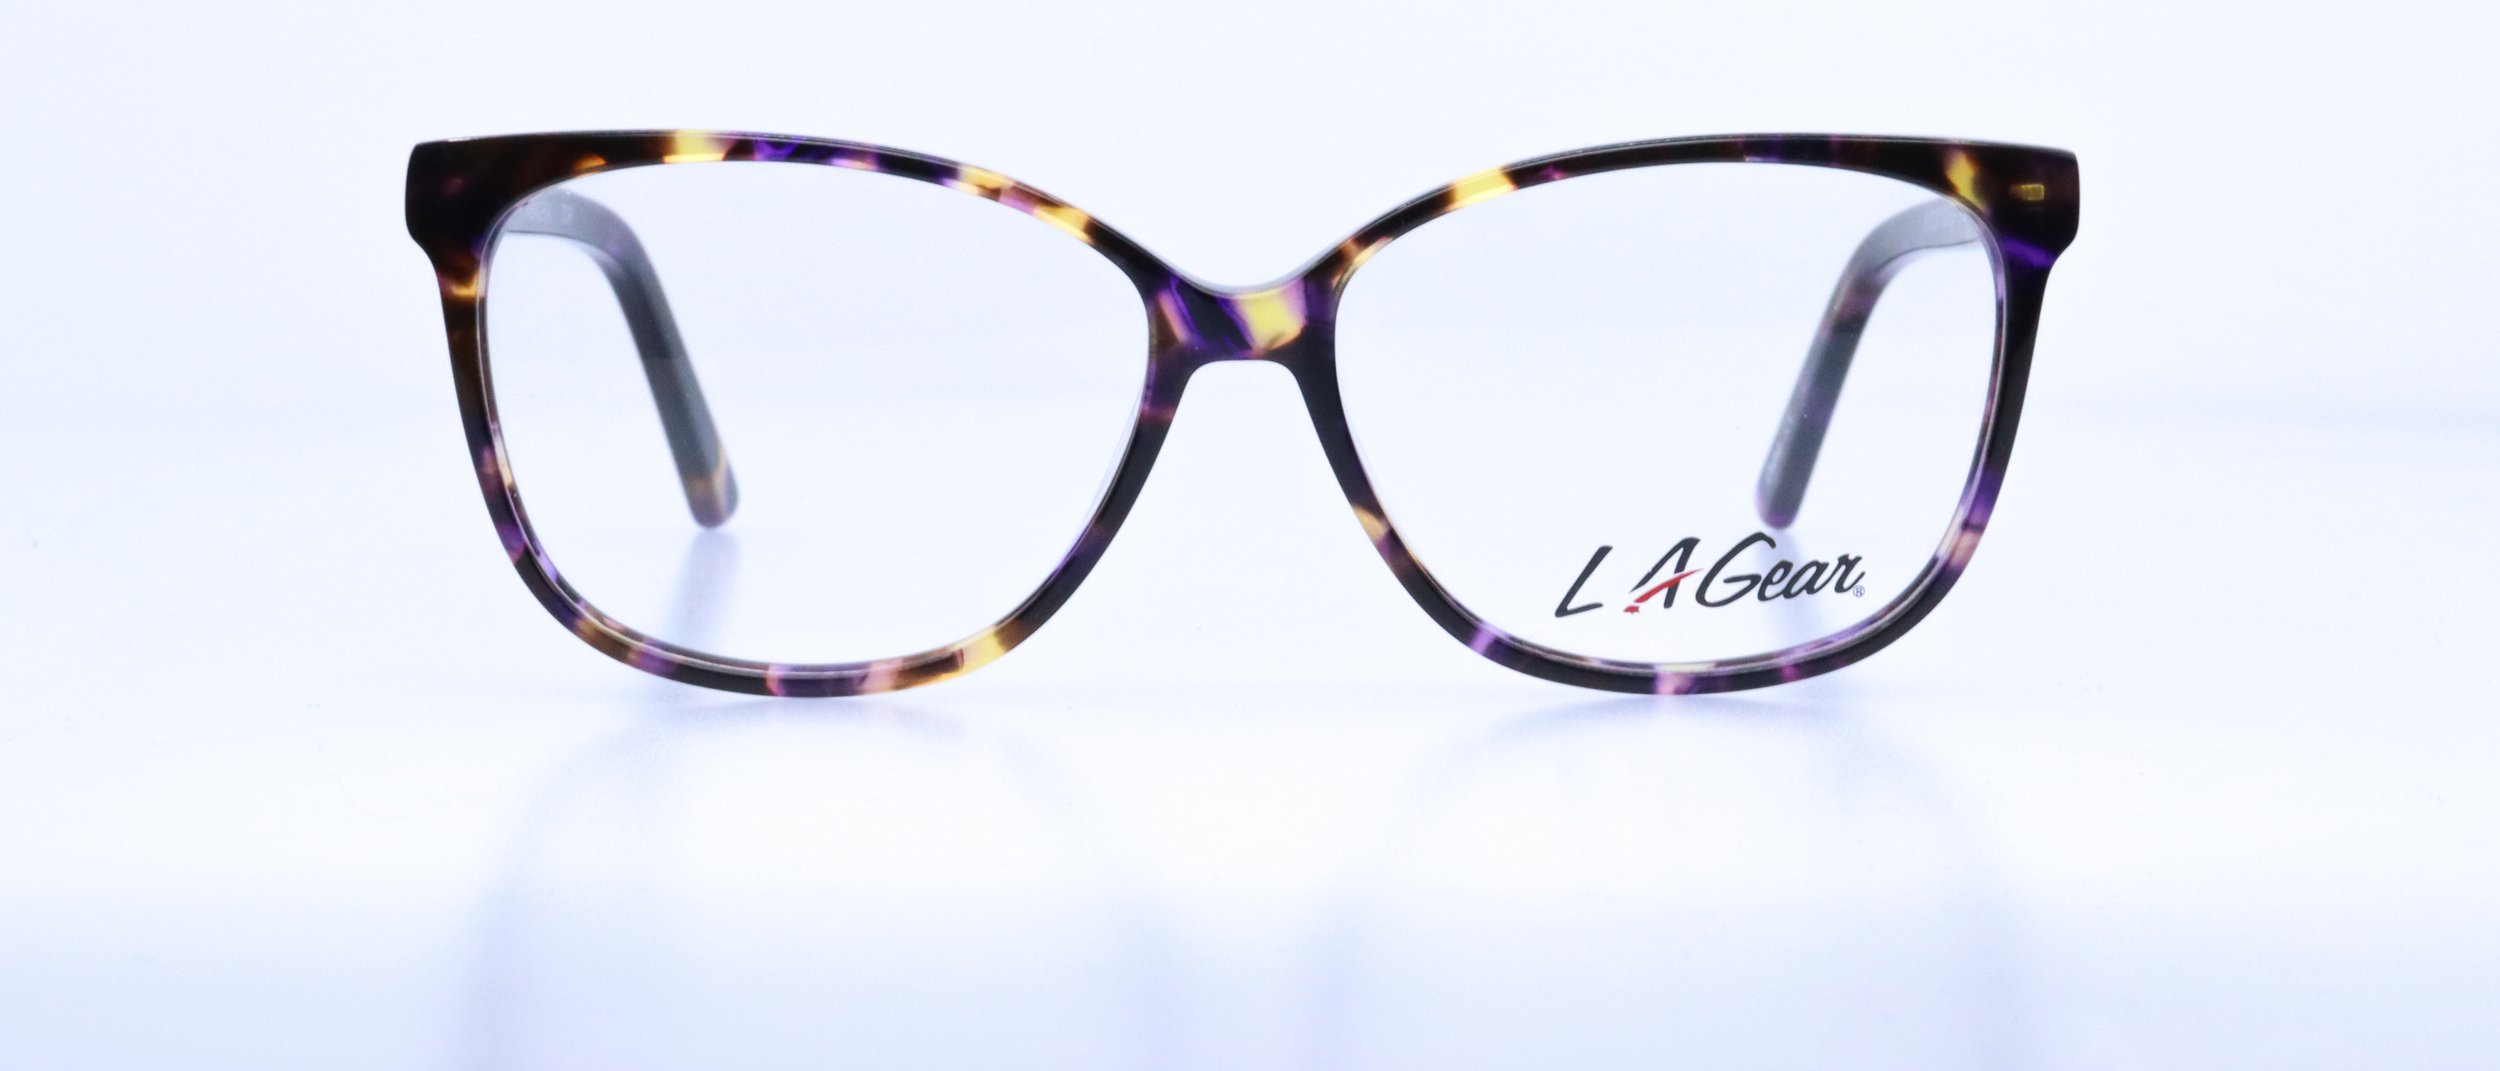  Pasadena: 54-14-140, Available in Amber/Plum or Tortoise 